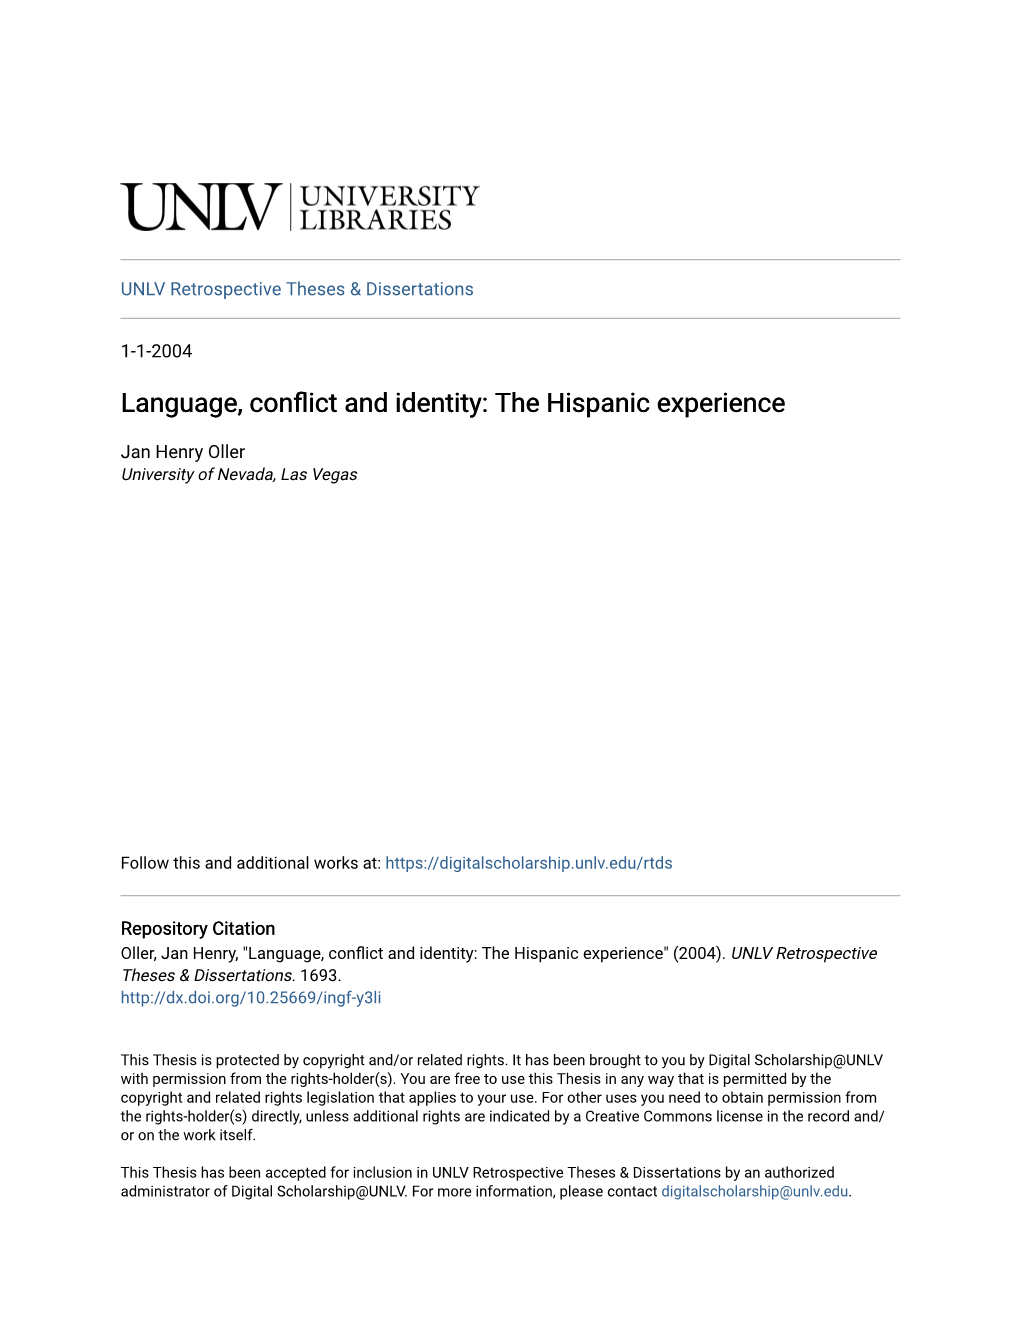 Language, Conflict and Identity: the Hispanic Experience